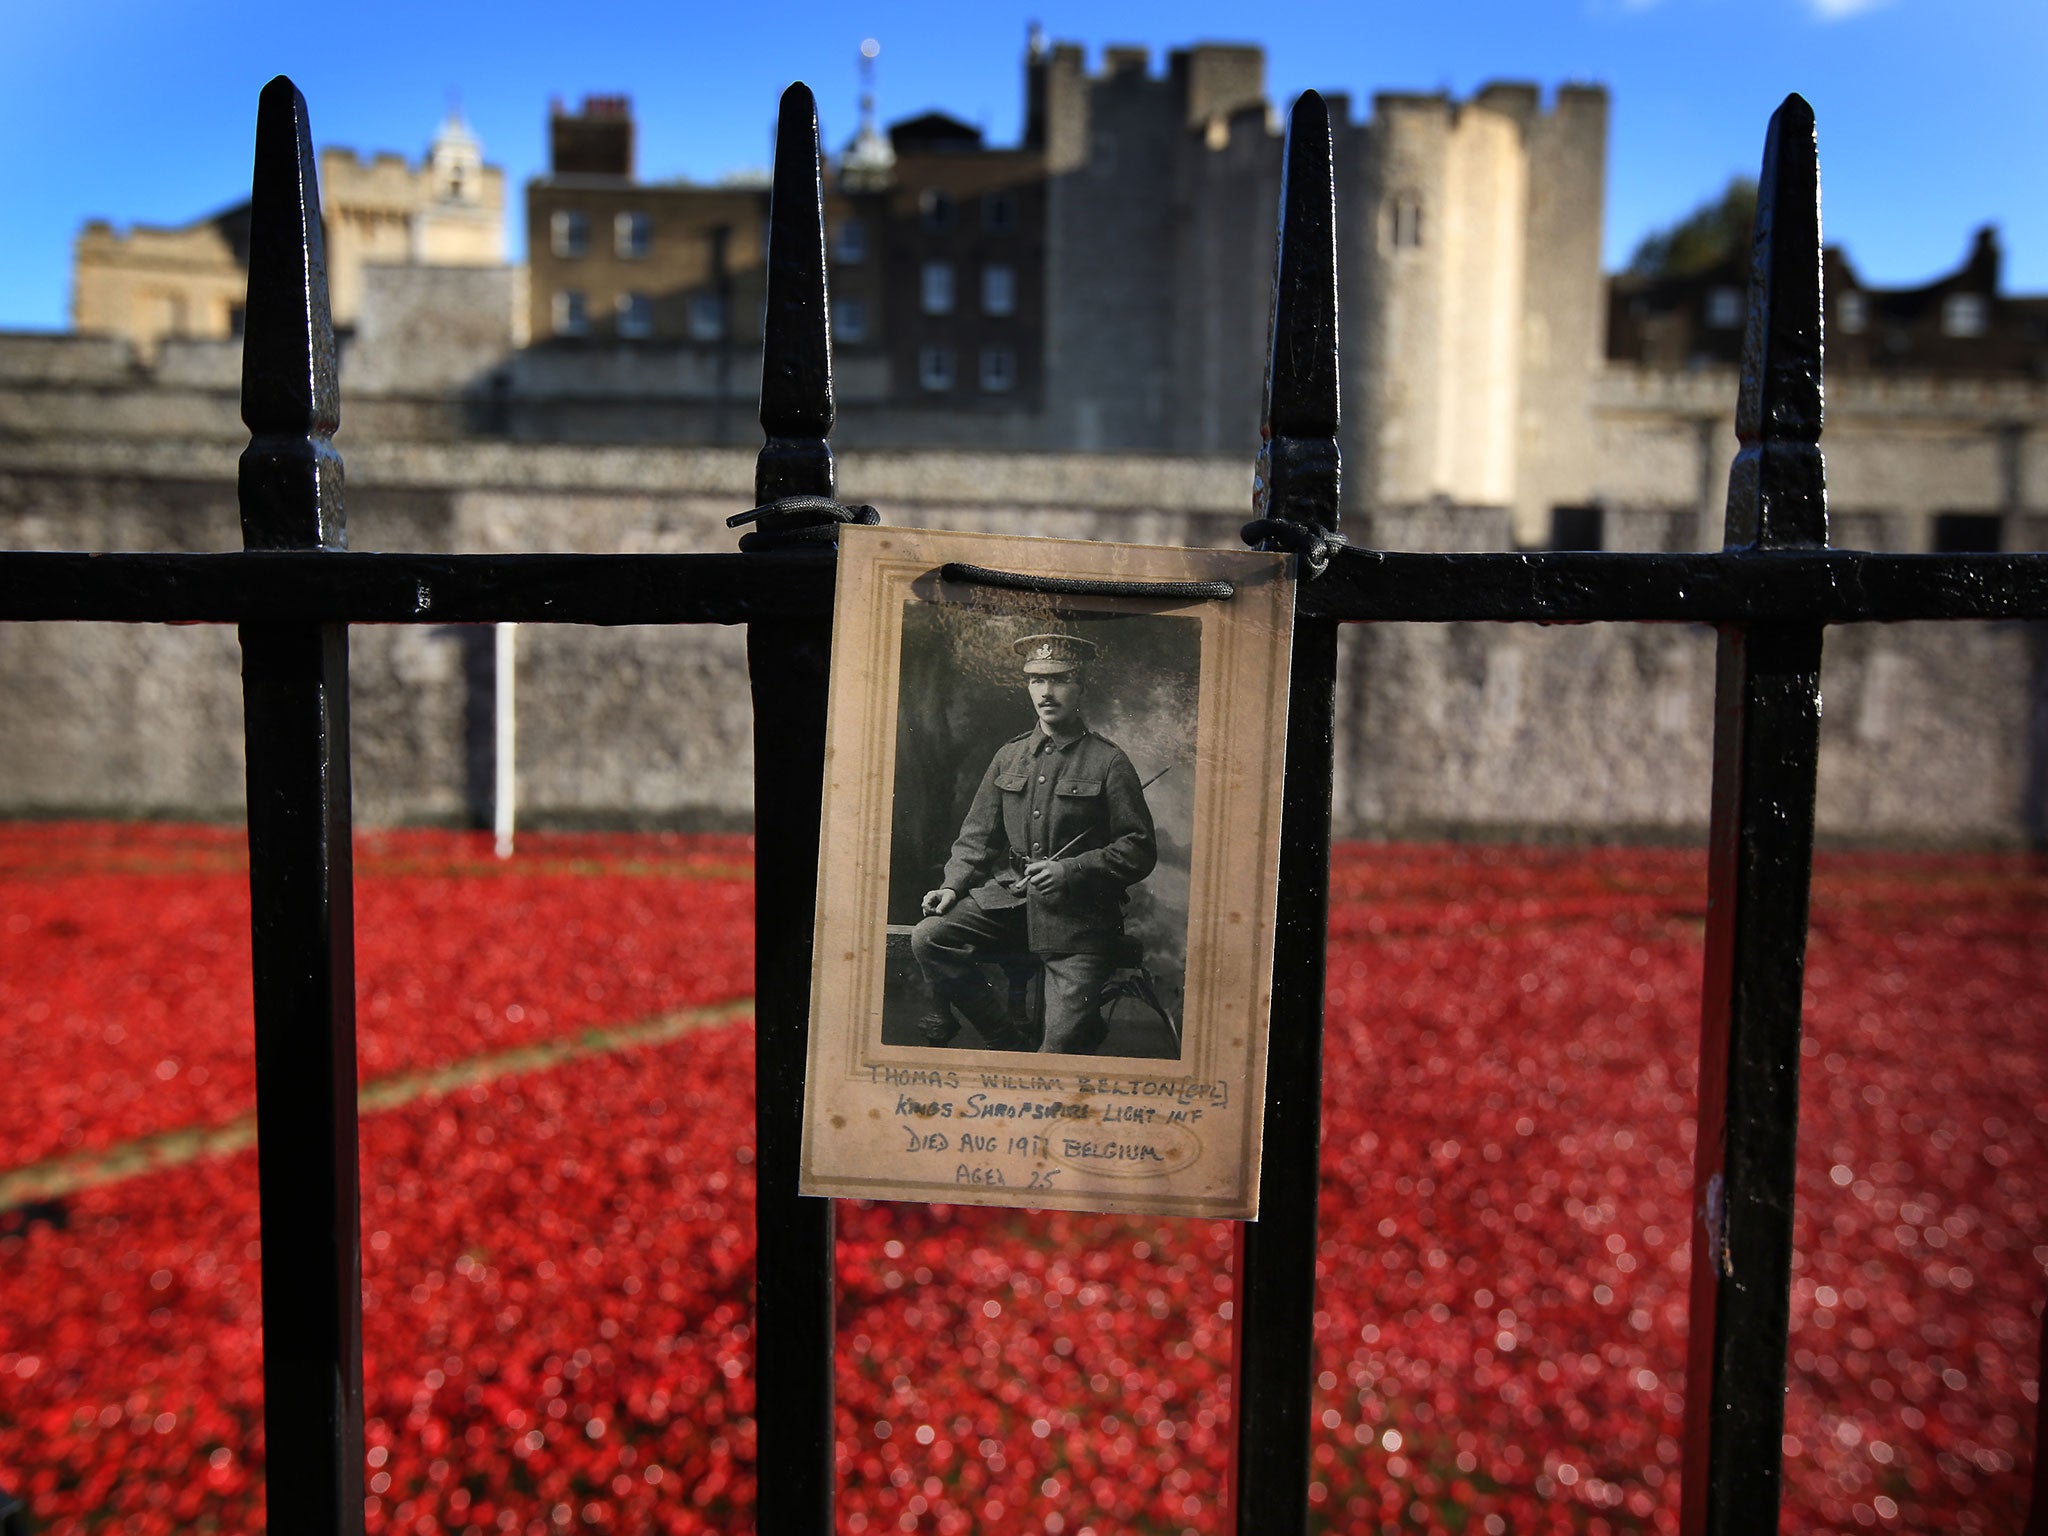 A photograph of Cpl Thomas William Belton of the Kings Shropshire Light Infantry at the gates of the Tower of London poppy installation